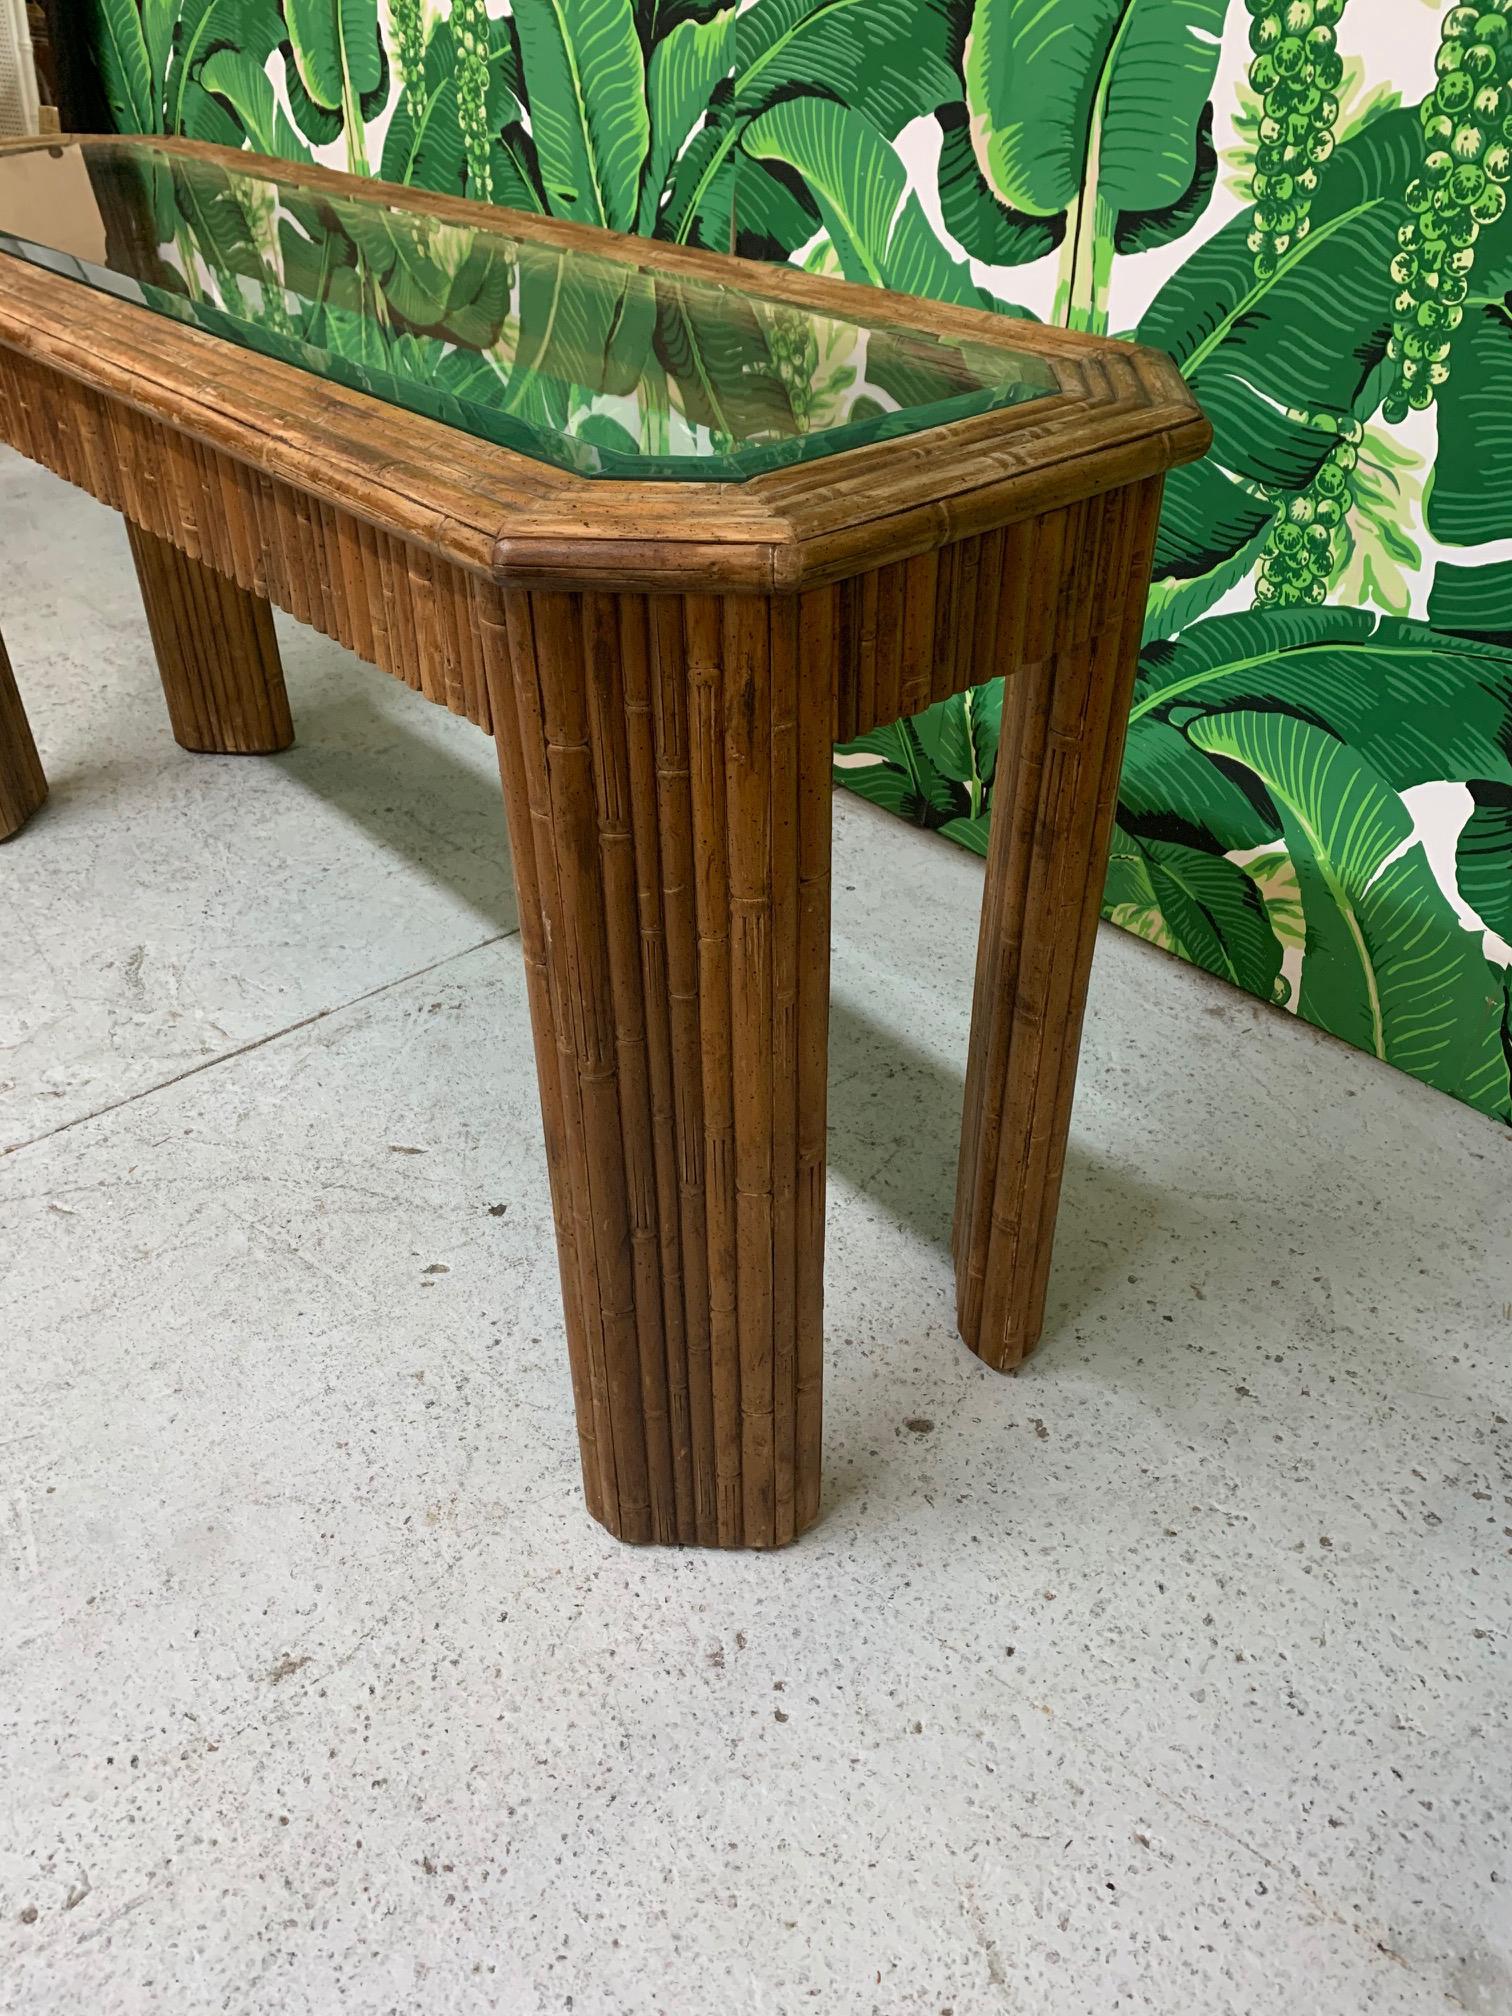 Vintage console table features full bamboo veneer and glass insert top. Good vintage condition with minor imperfections consistent with age.
 